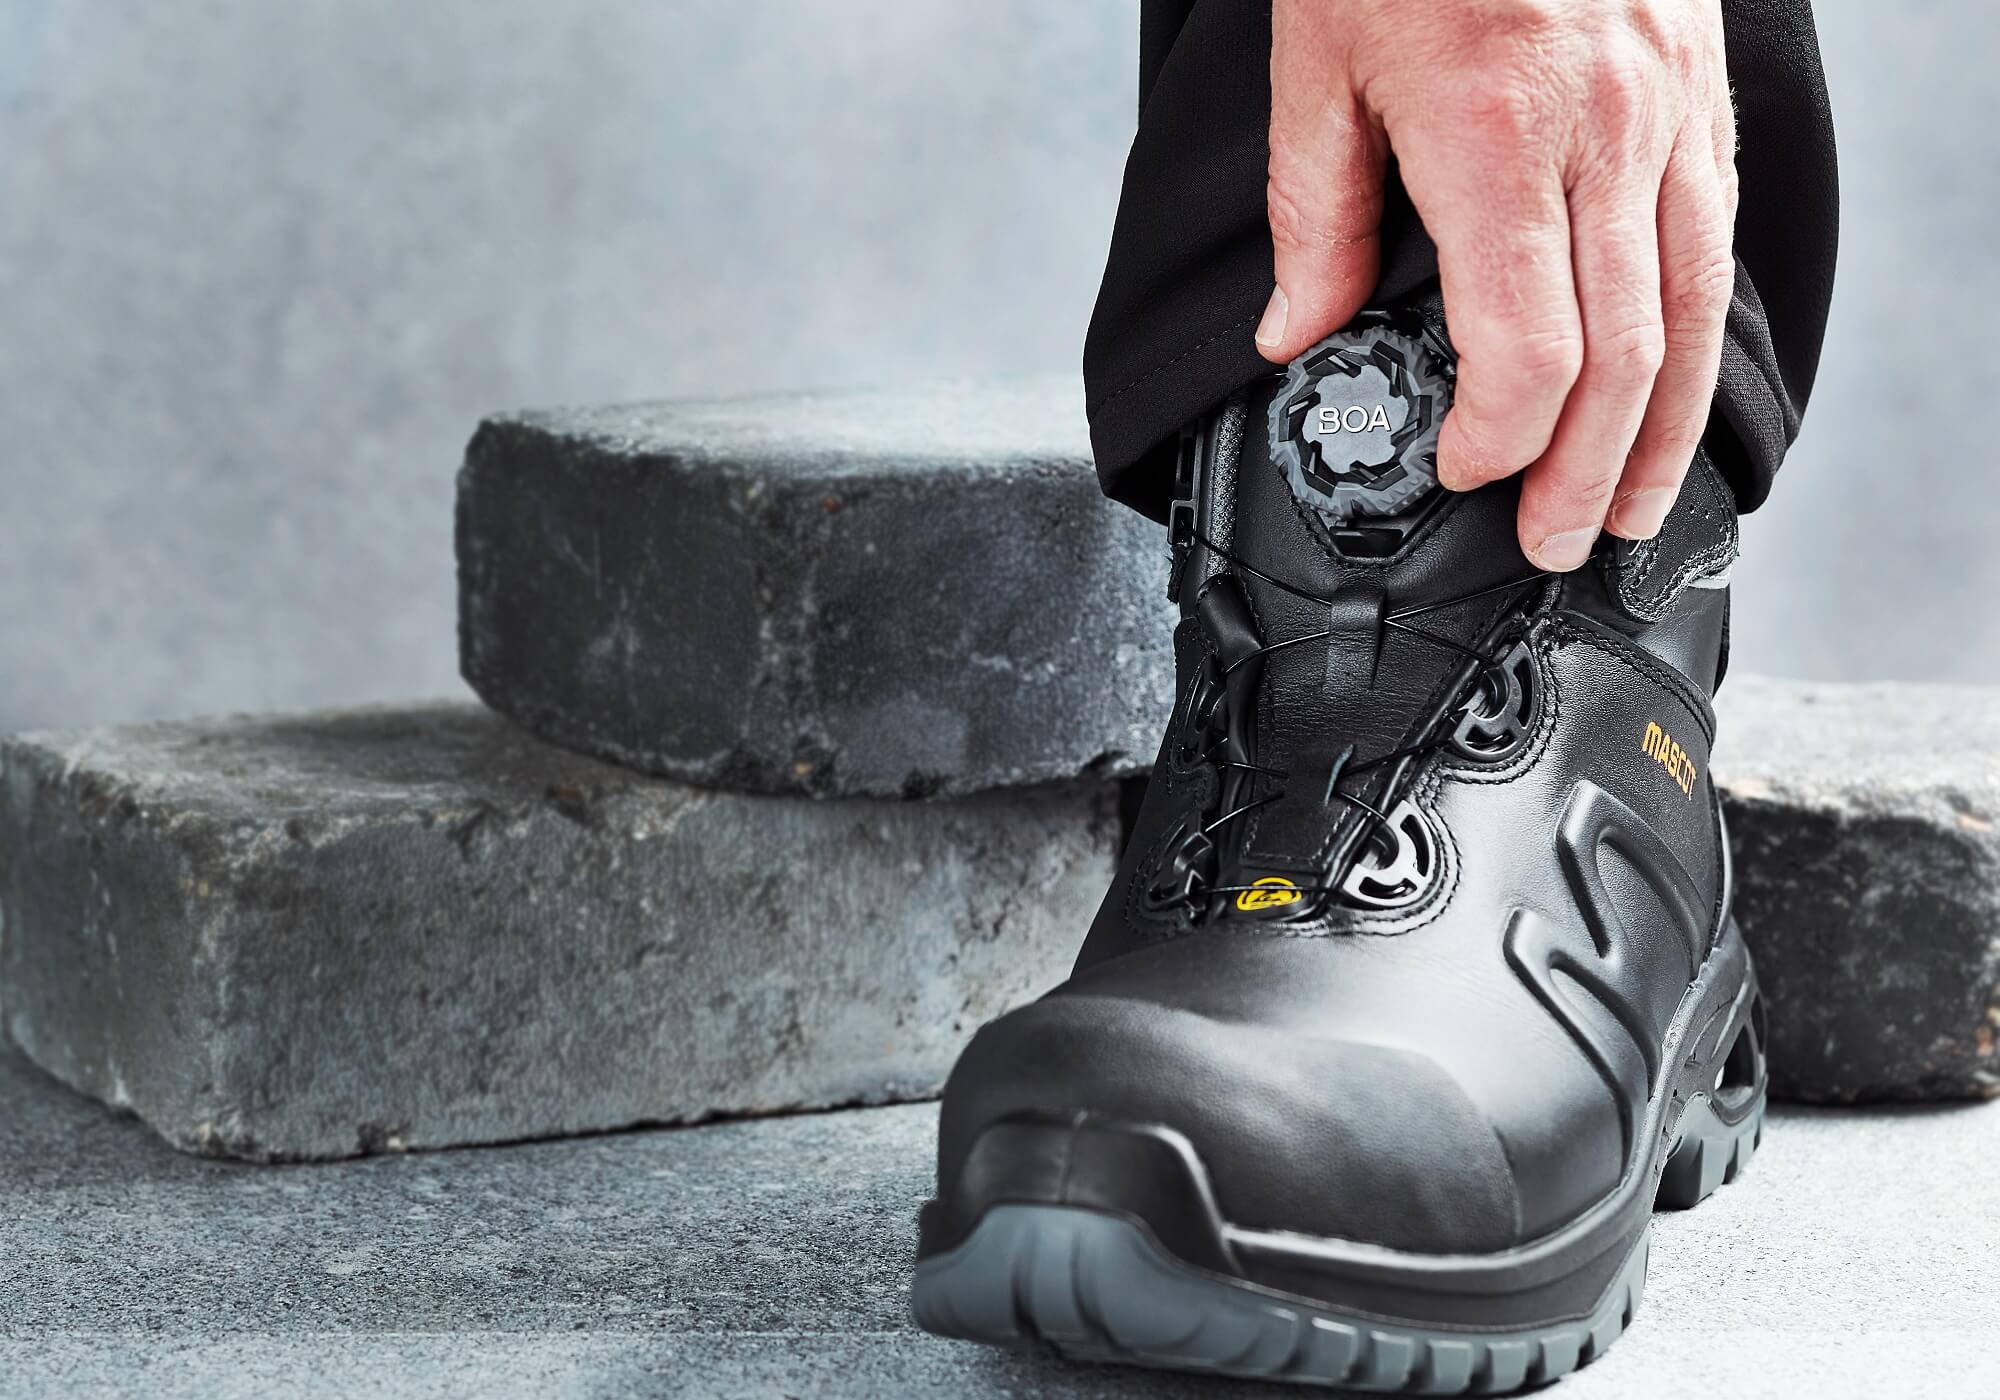 Howsafe UK Safety footwear, boots, shoes and trainers